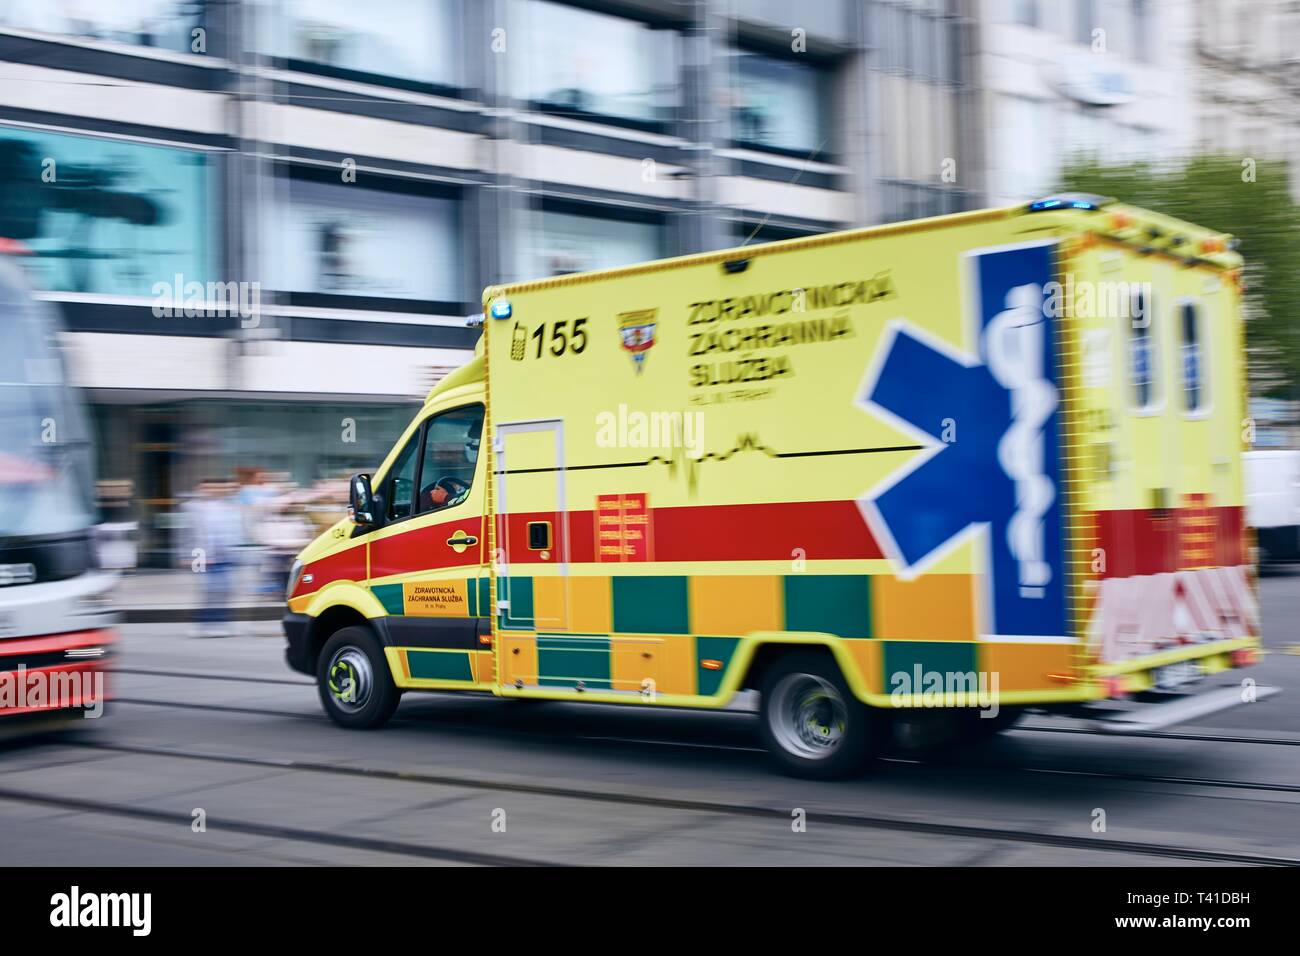 Prague, Czech Republic - April 9, 2019:  Ambulance car of Emergency medical service rushing on the street at Wenceslas Square in Prague on April 9, 20 Stock Photo